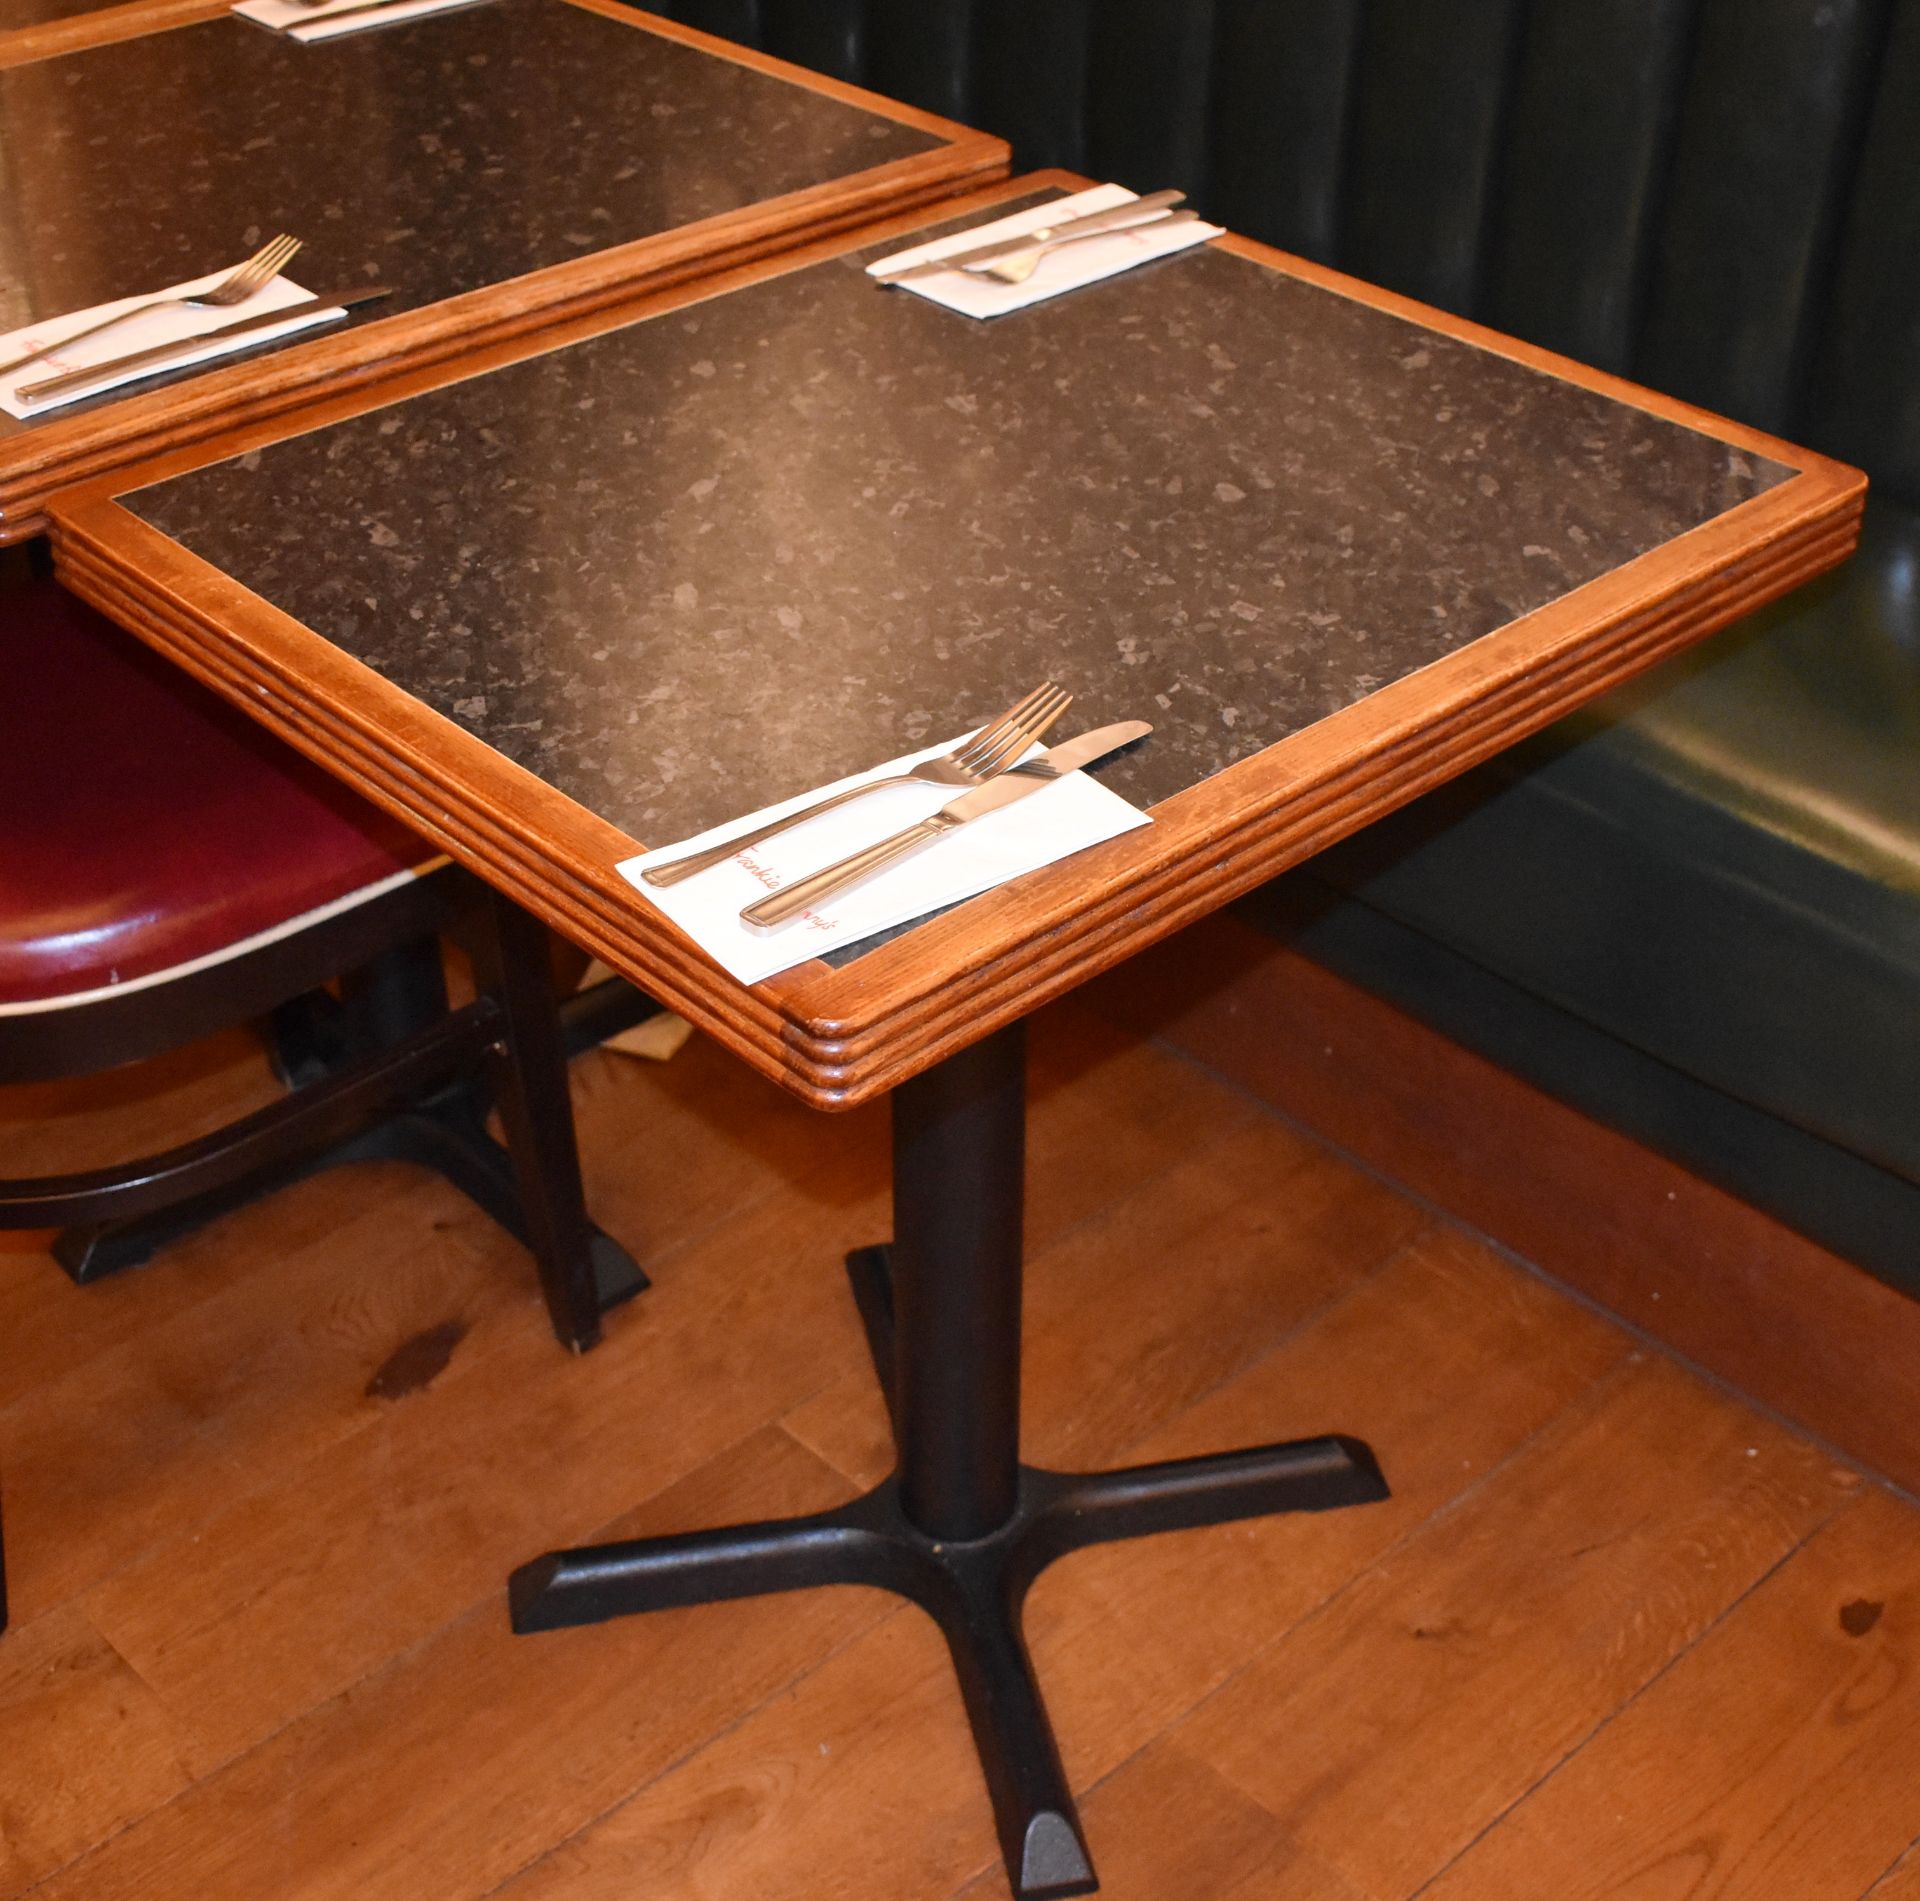 4 x Restaurant Bistro Tables With Granite Effect Tops and Cast Iron Bases - From American Italian - Image 2 of 7